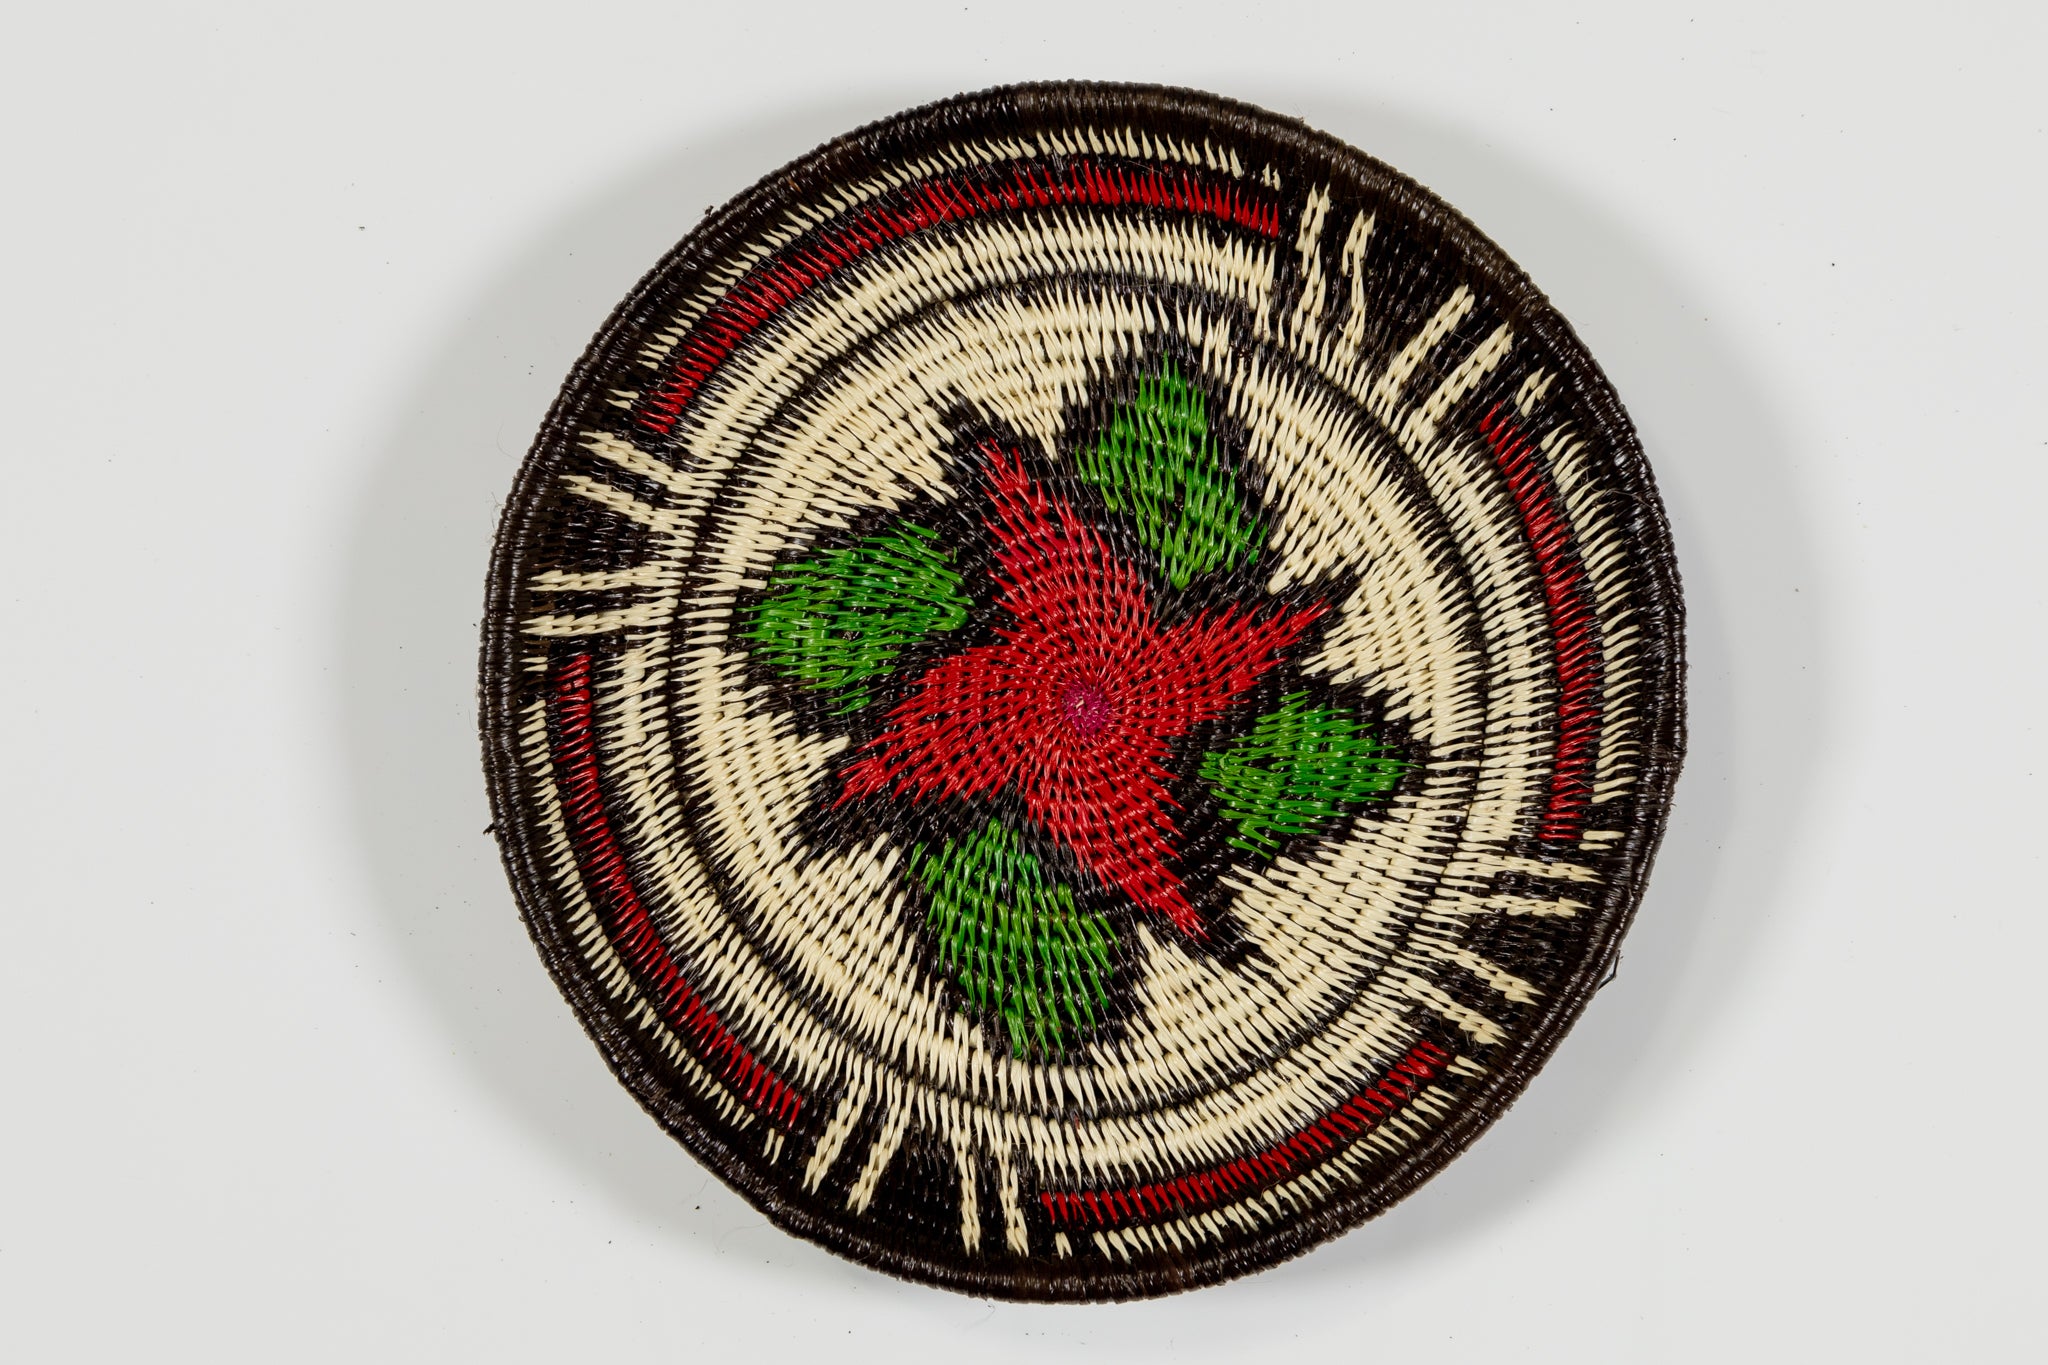 Red And Green Spiral Flower Small Basket Plate